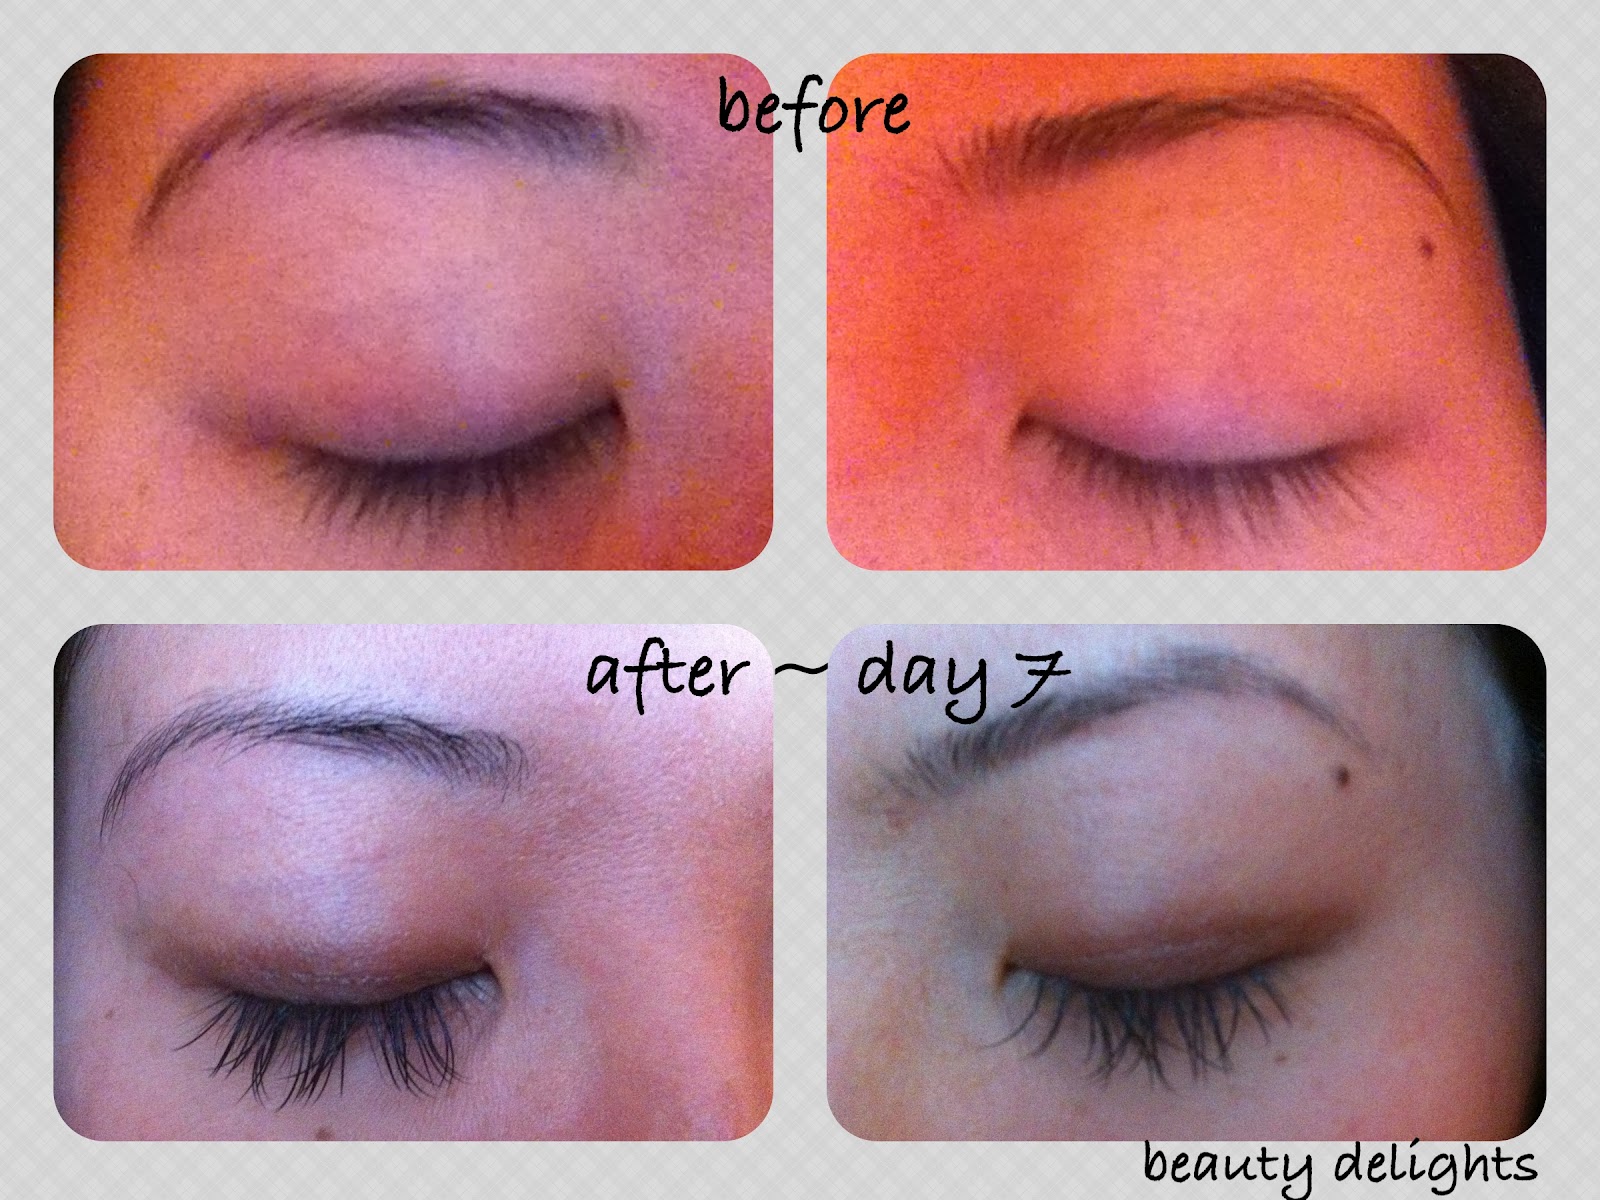 beauty delights: REVIEW: Mink Eyelash Extensions - Week 2